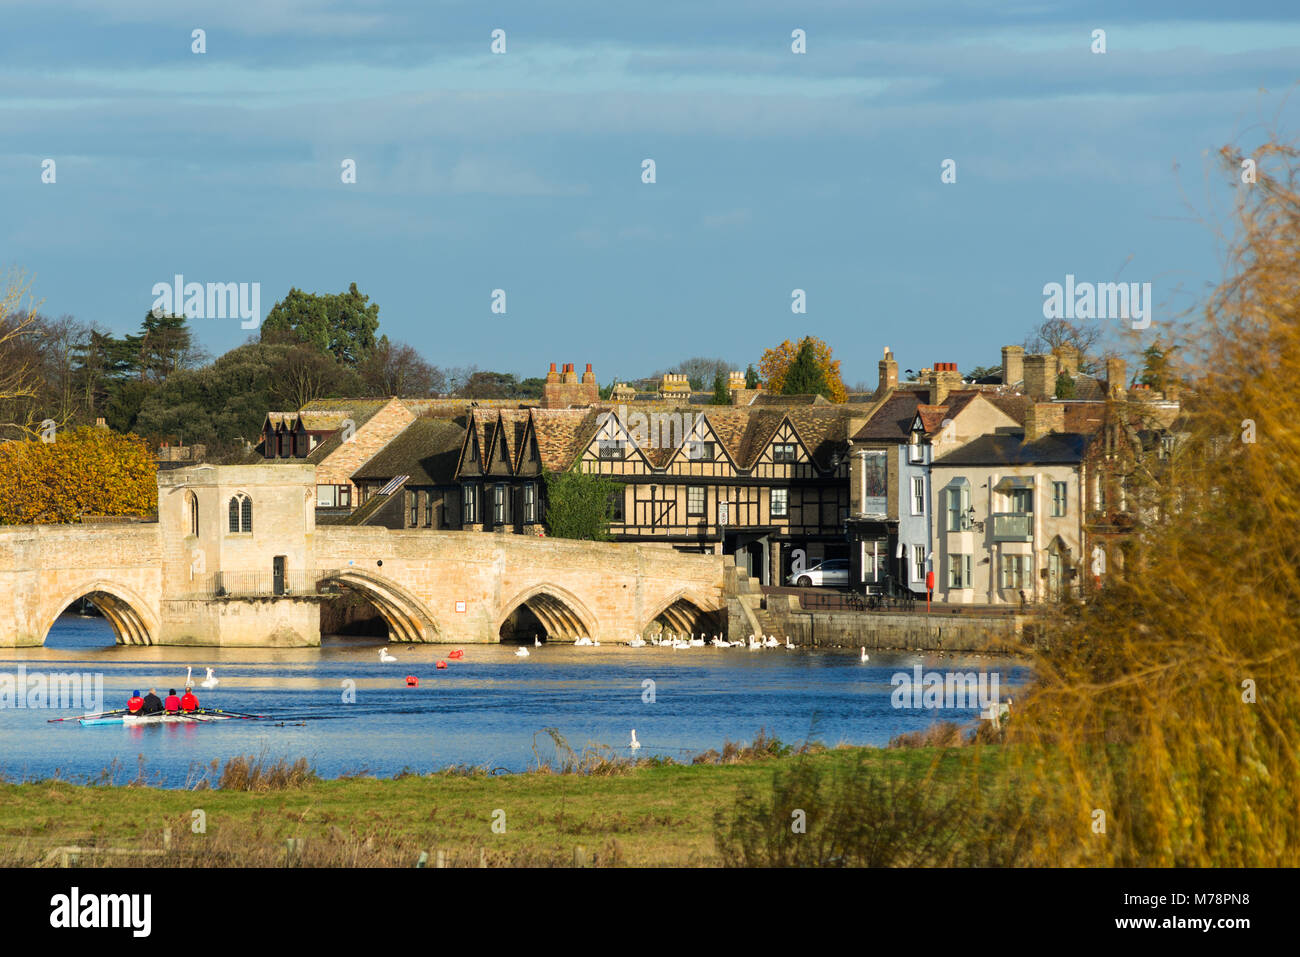 River Great Ouse with the medieval St. Leger Chapel Bridge at St. Ives, Cambridgeshire, England, United Kingdom, Europe Stock Photo